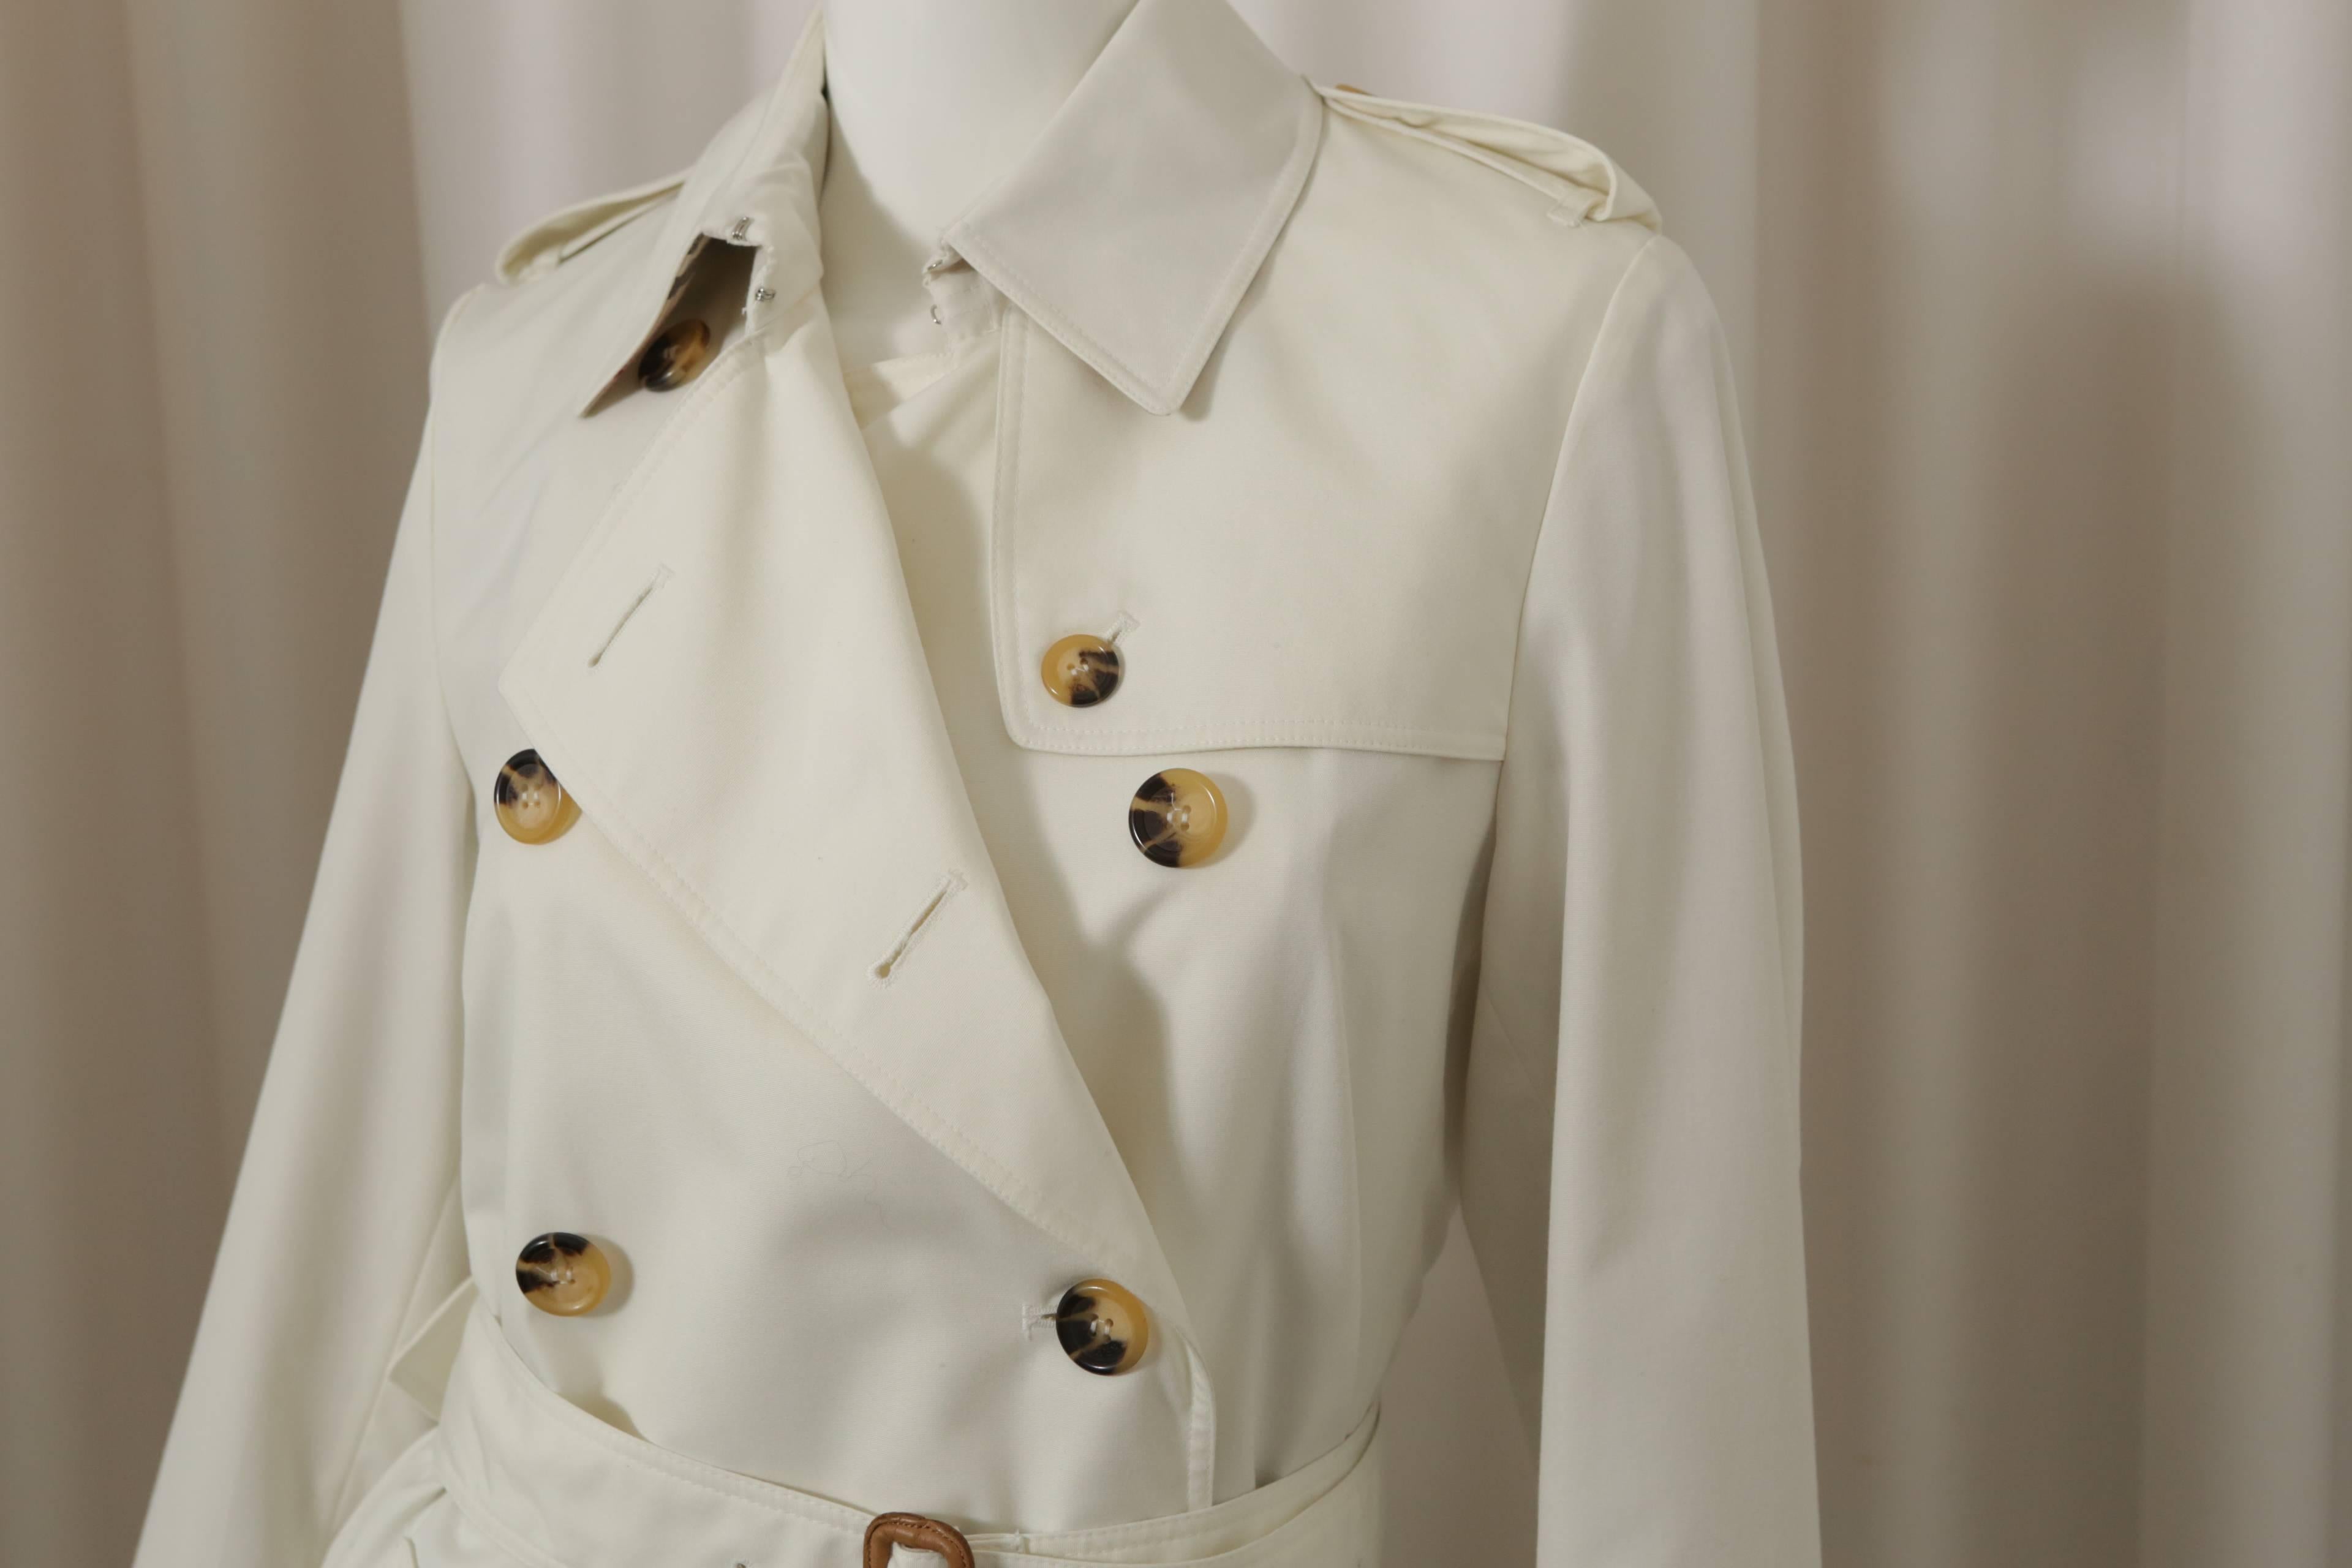 Burberry London classic ivory trench coat w/ tortoise doucble breasted buttons, belt, belts around wrists, & plaid lining. 